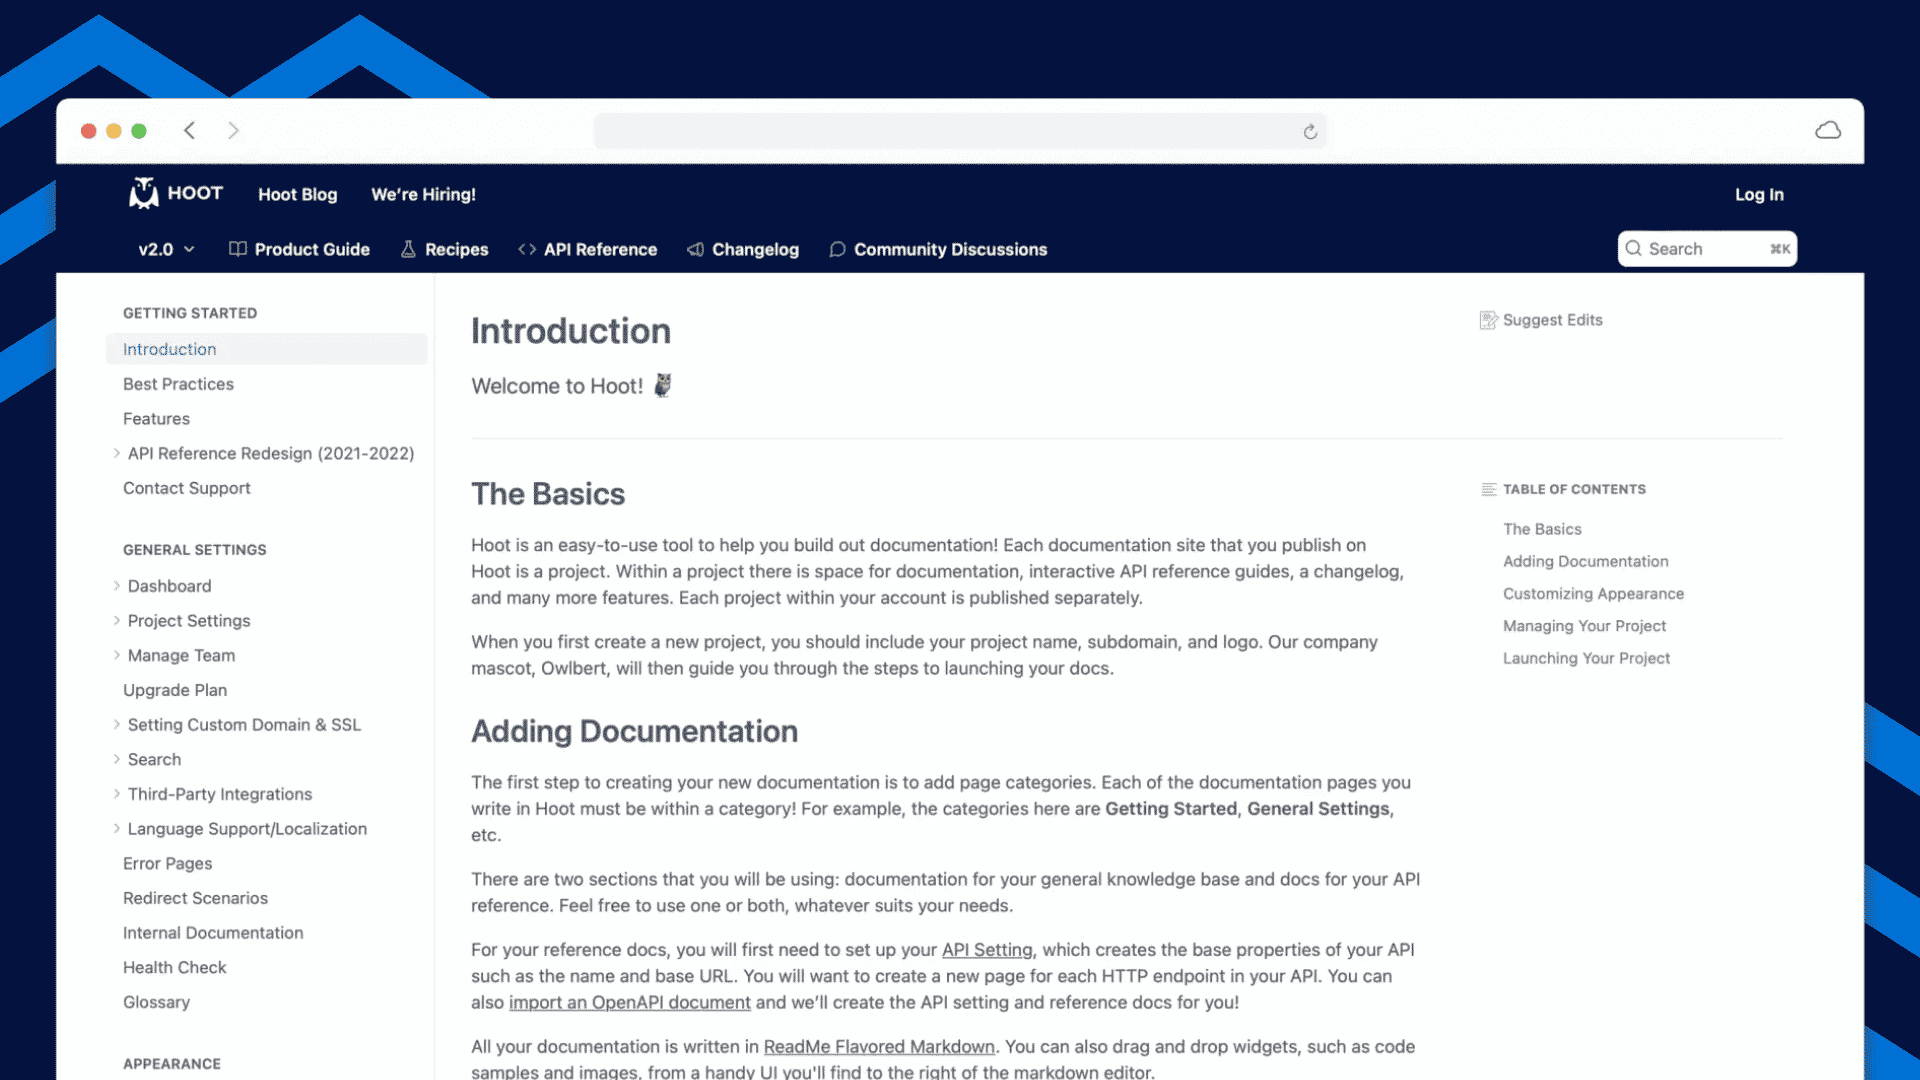 Tips to Improve the Design of Your API Documentation with ReadMe